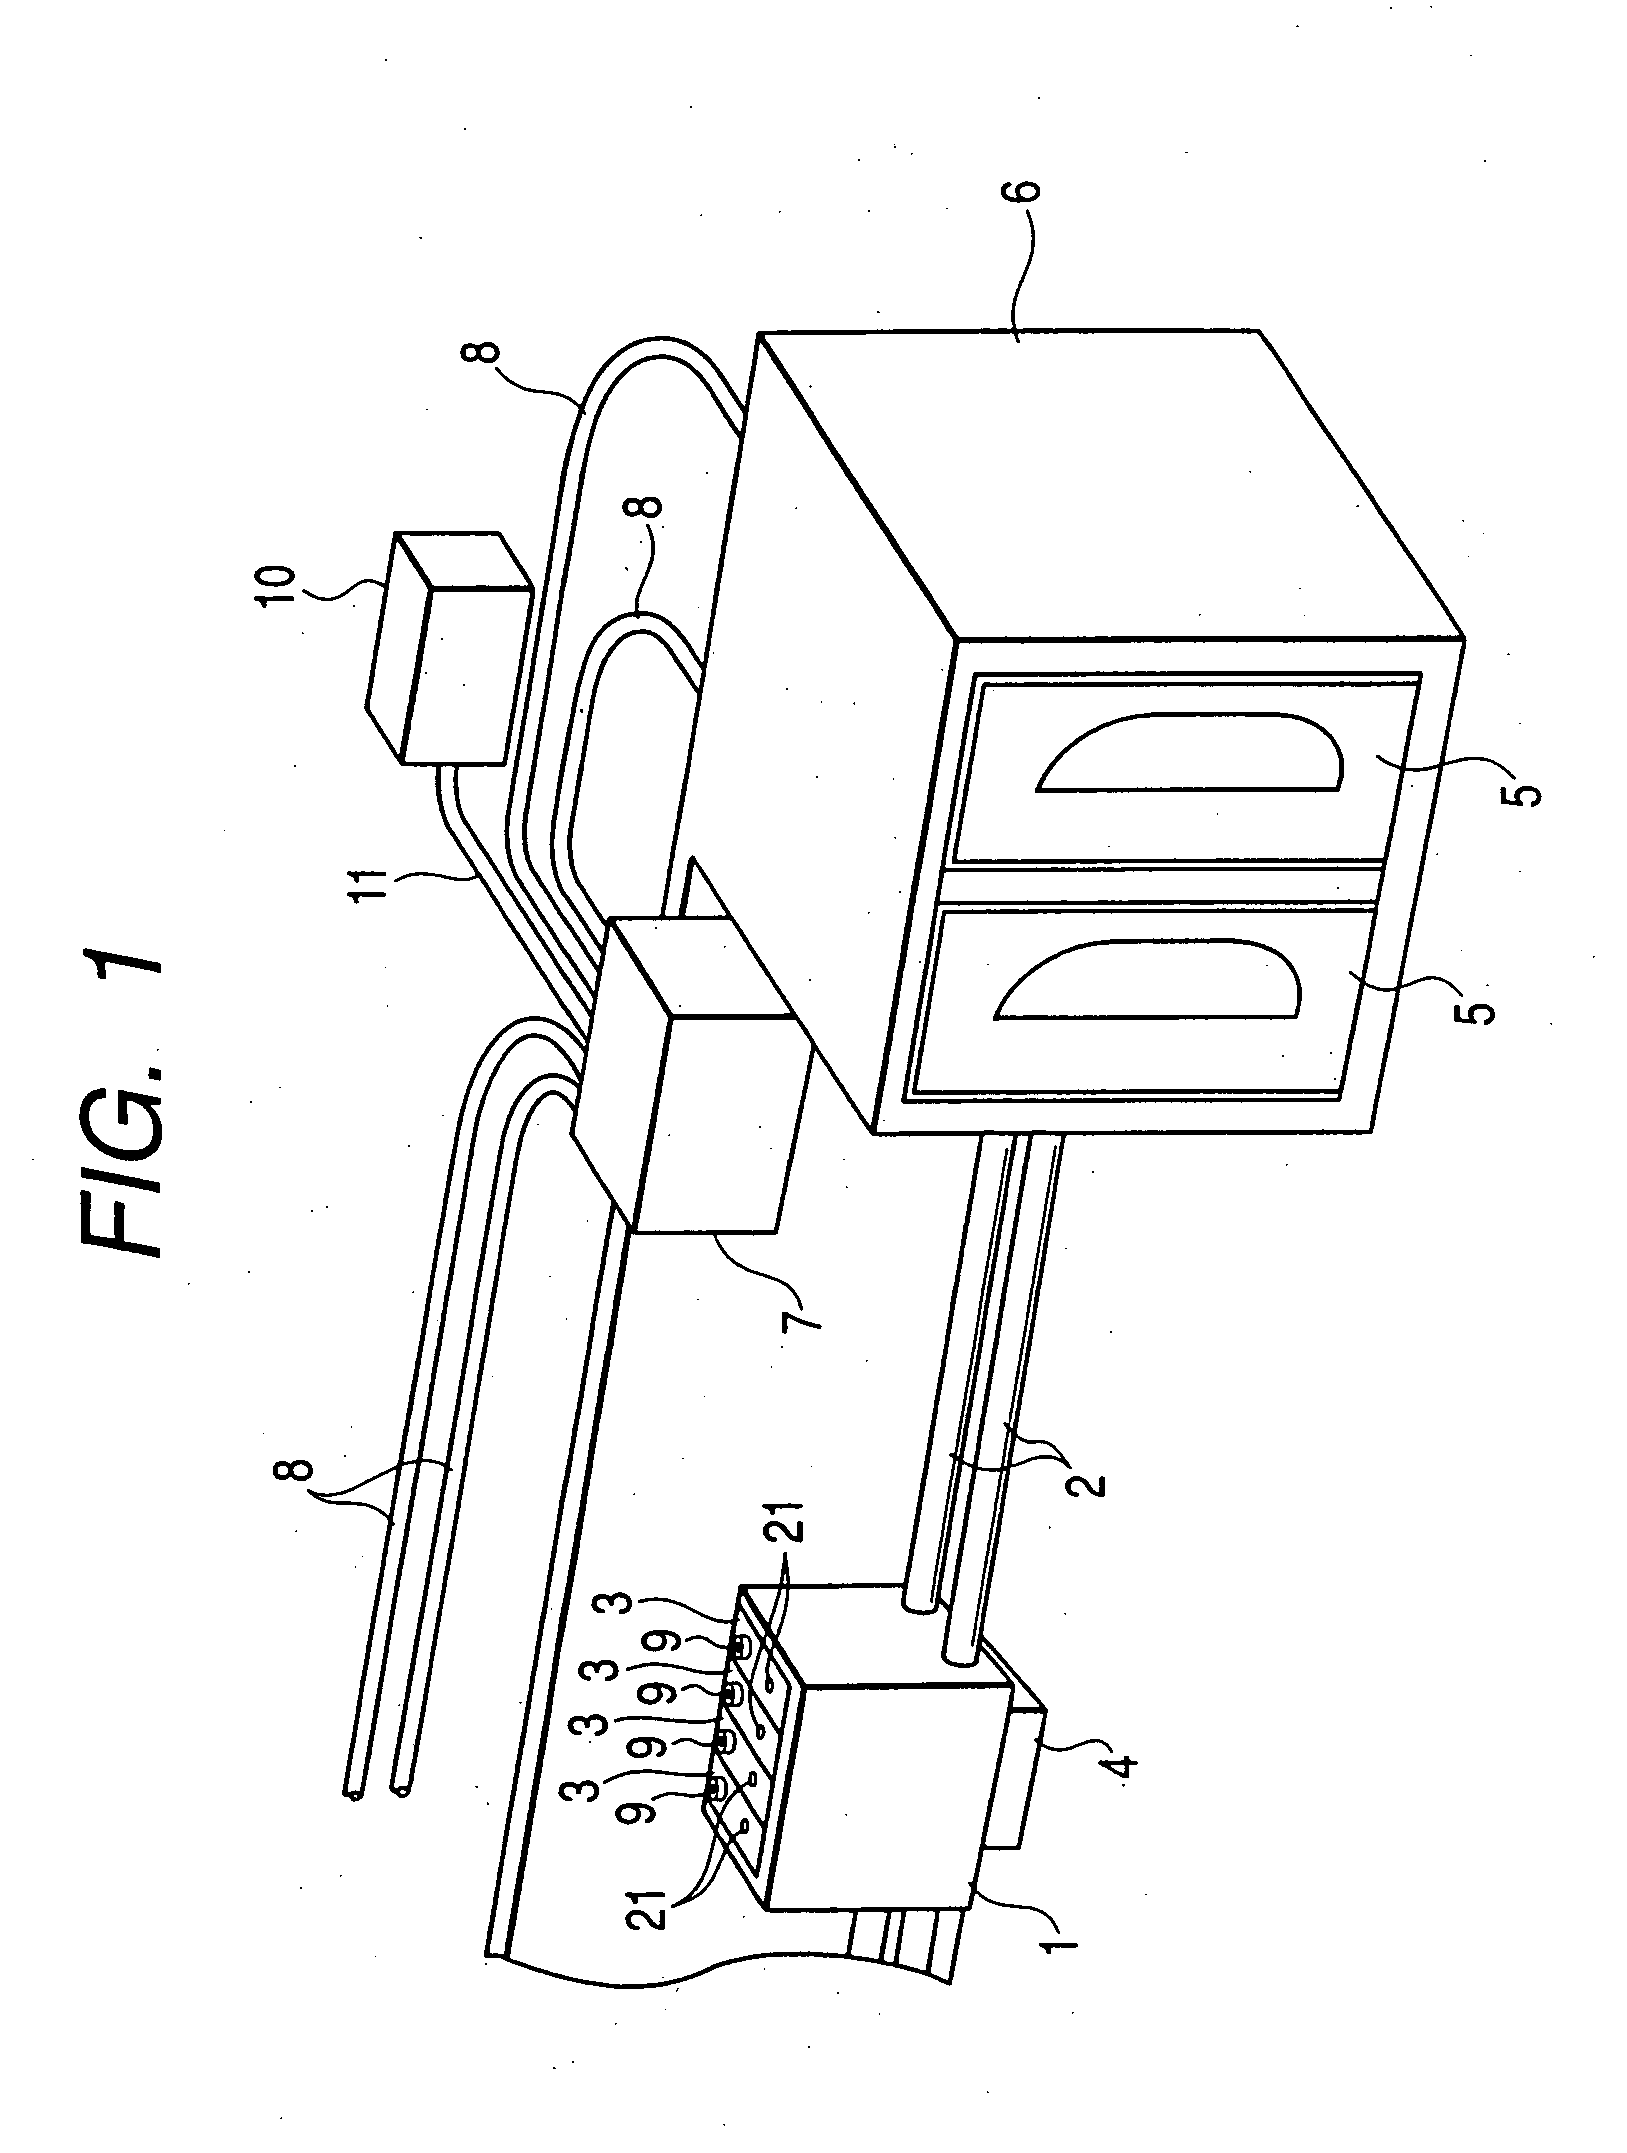 Ink-jet recording device and ink supply unit suitable for it